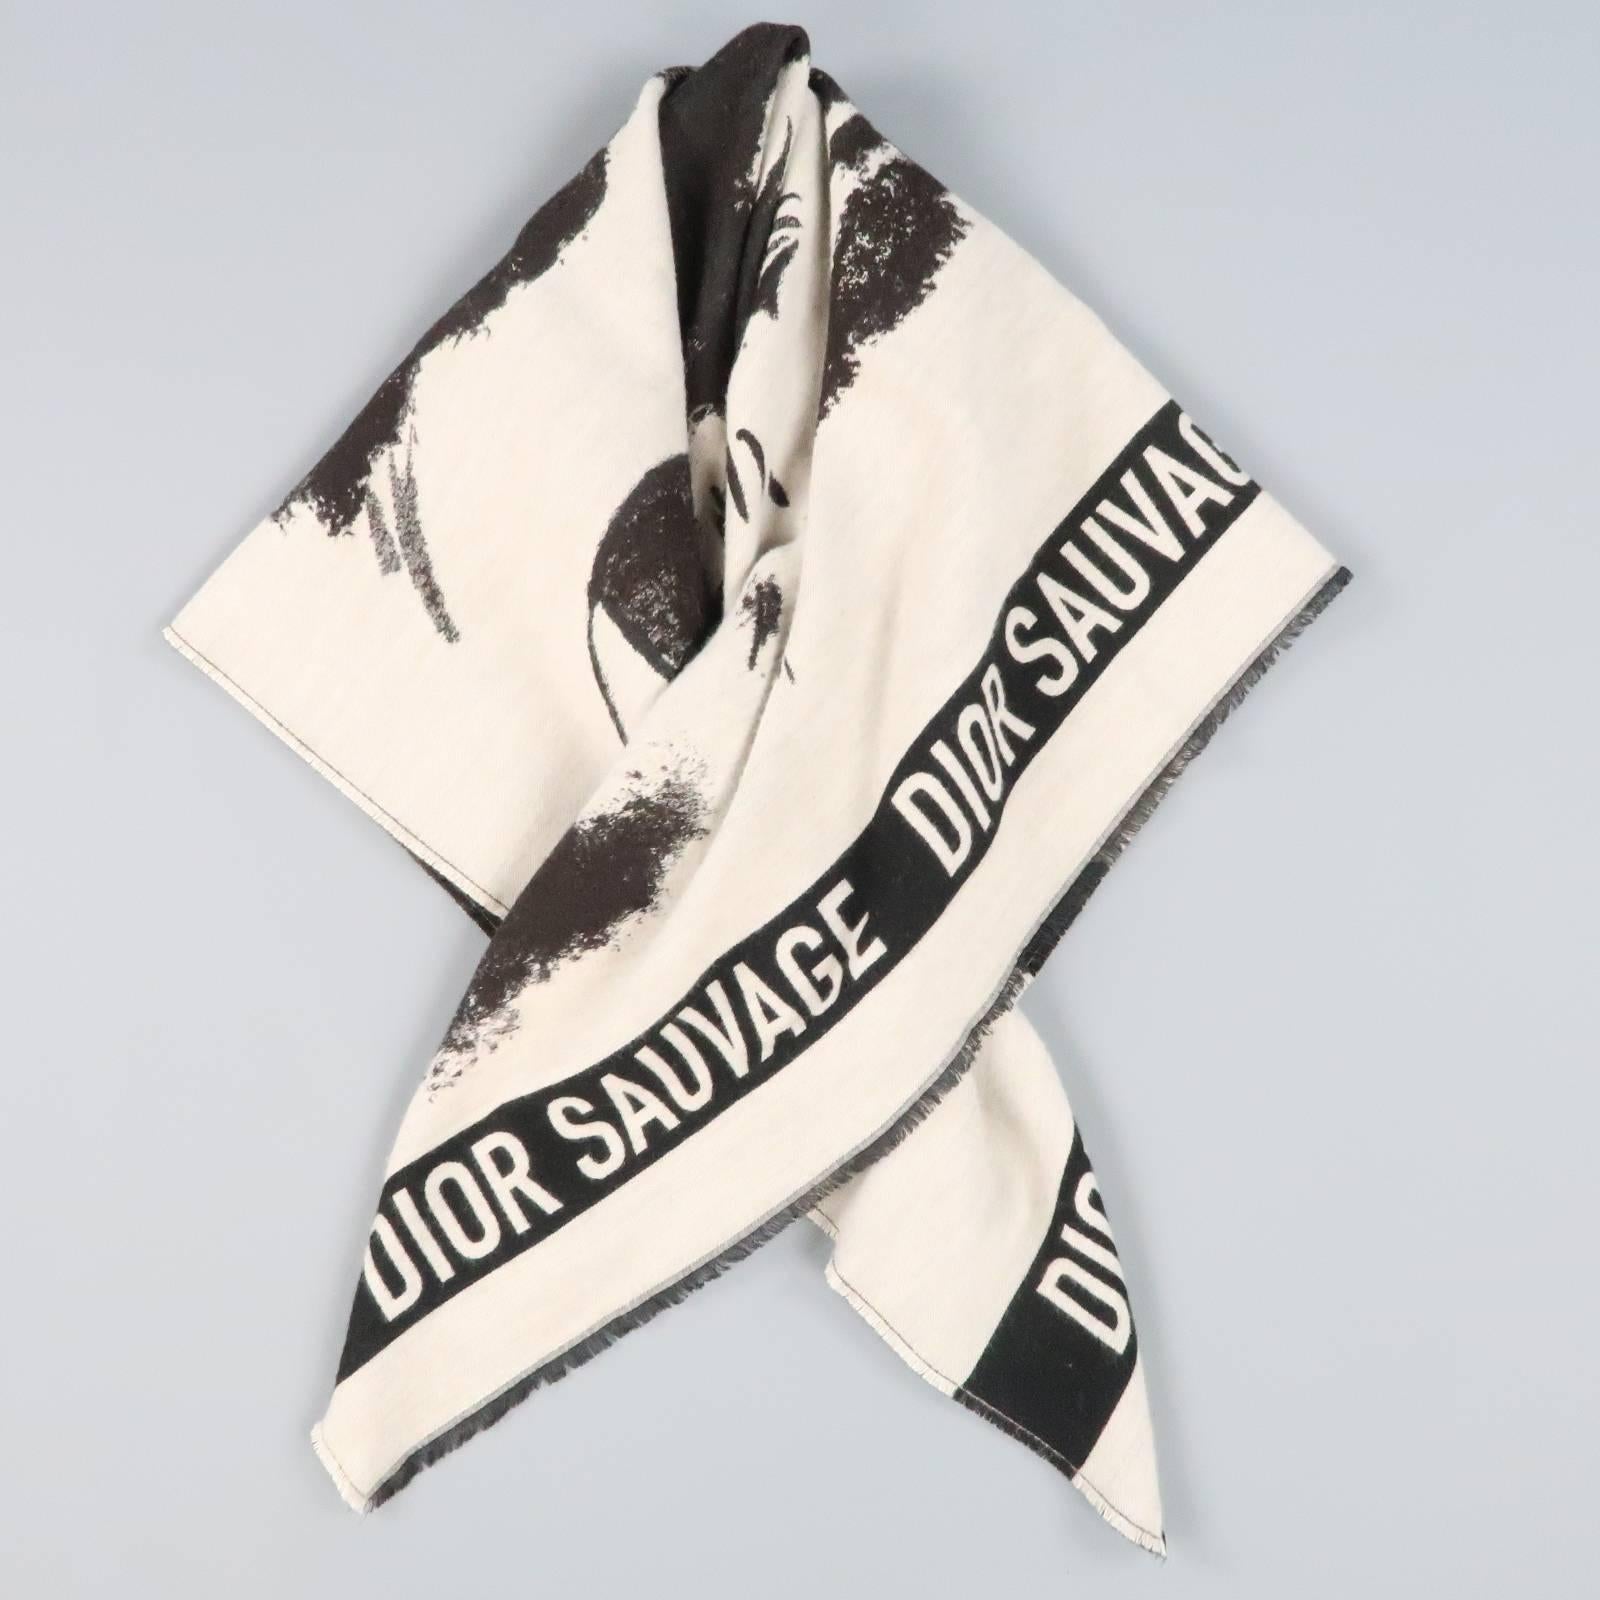 DIOR blanket scarf comes in an acrylic/wool/silk blend knit featuring an all over animal motif with 